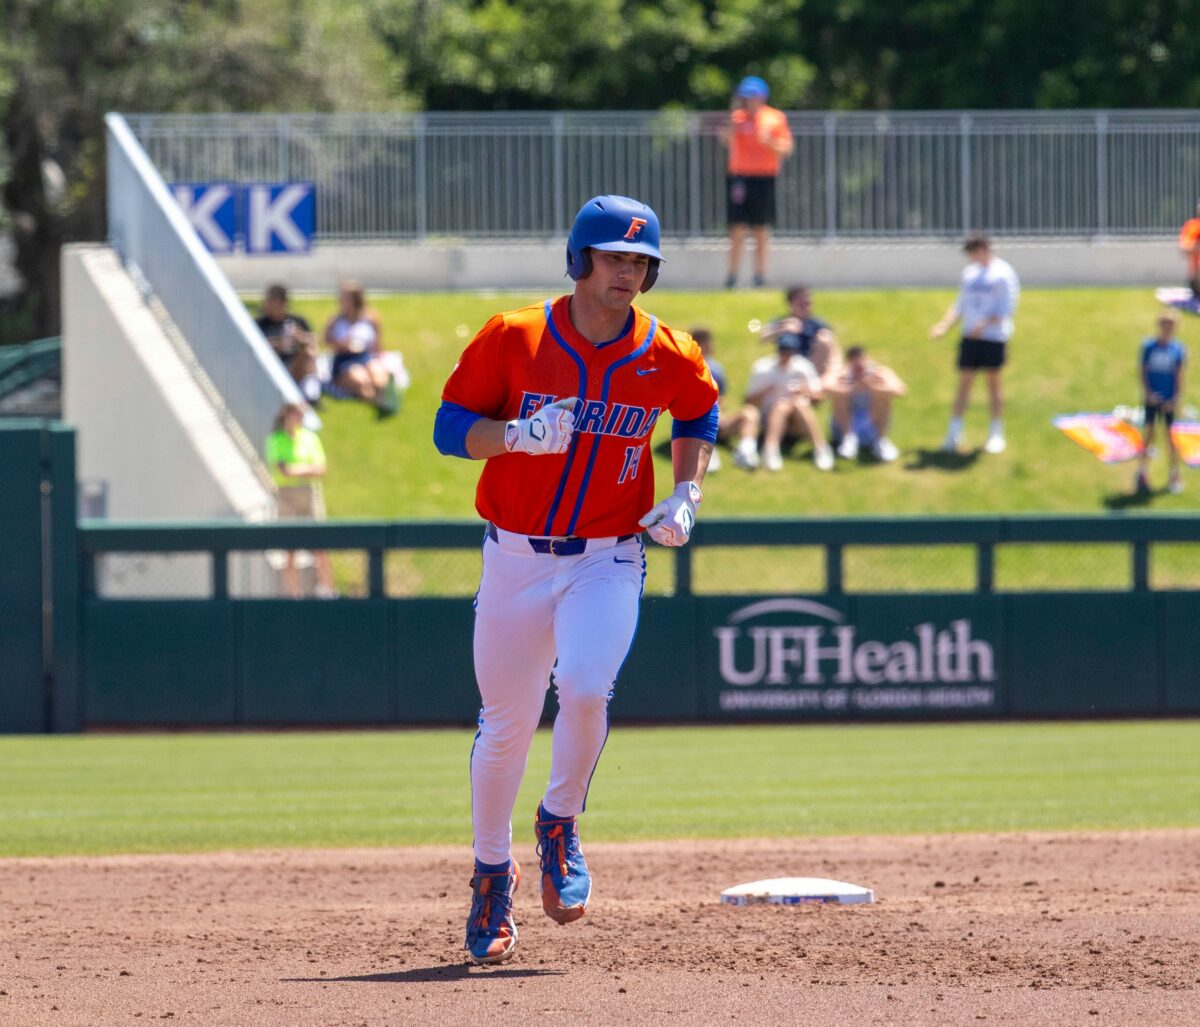 Gators get back on midweek track, mercy-rule Jacksonville in rematch